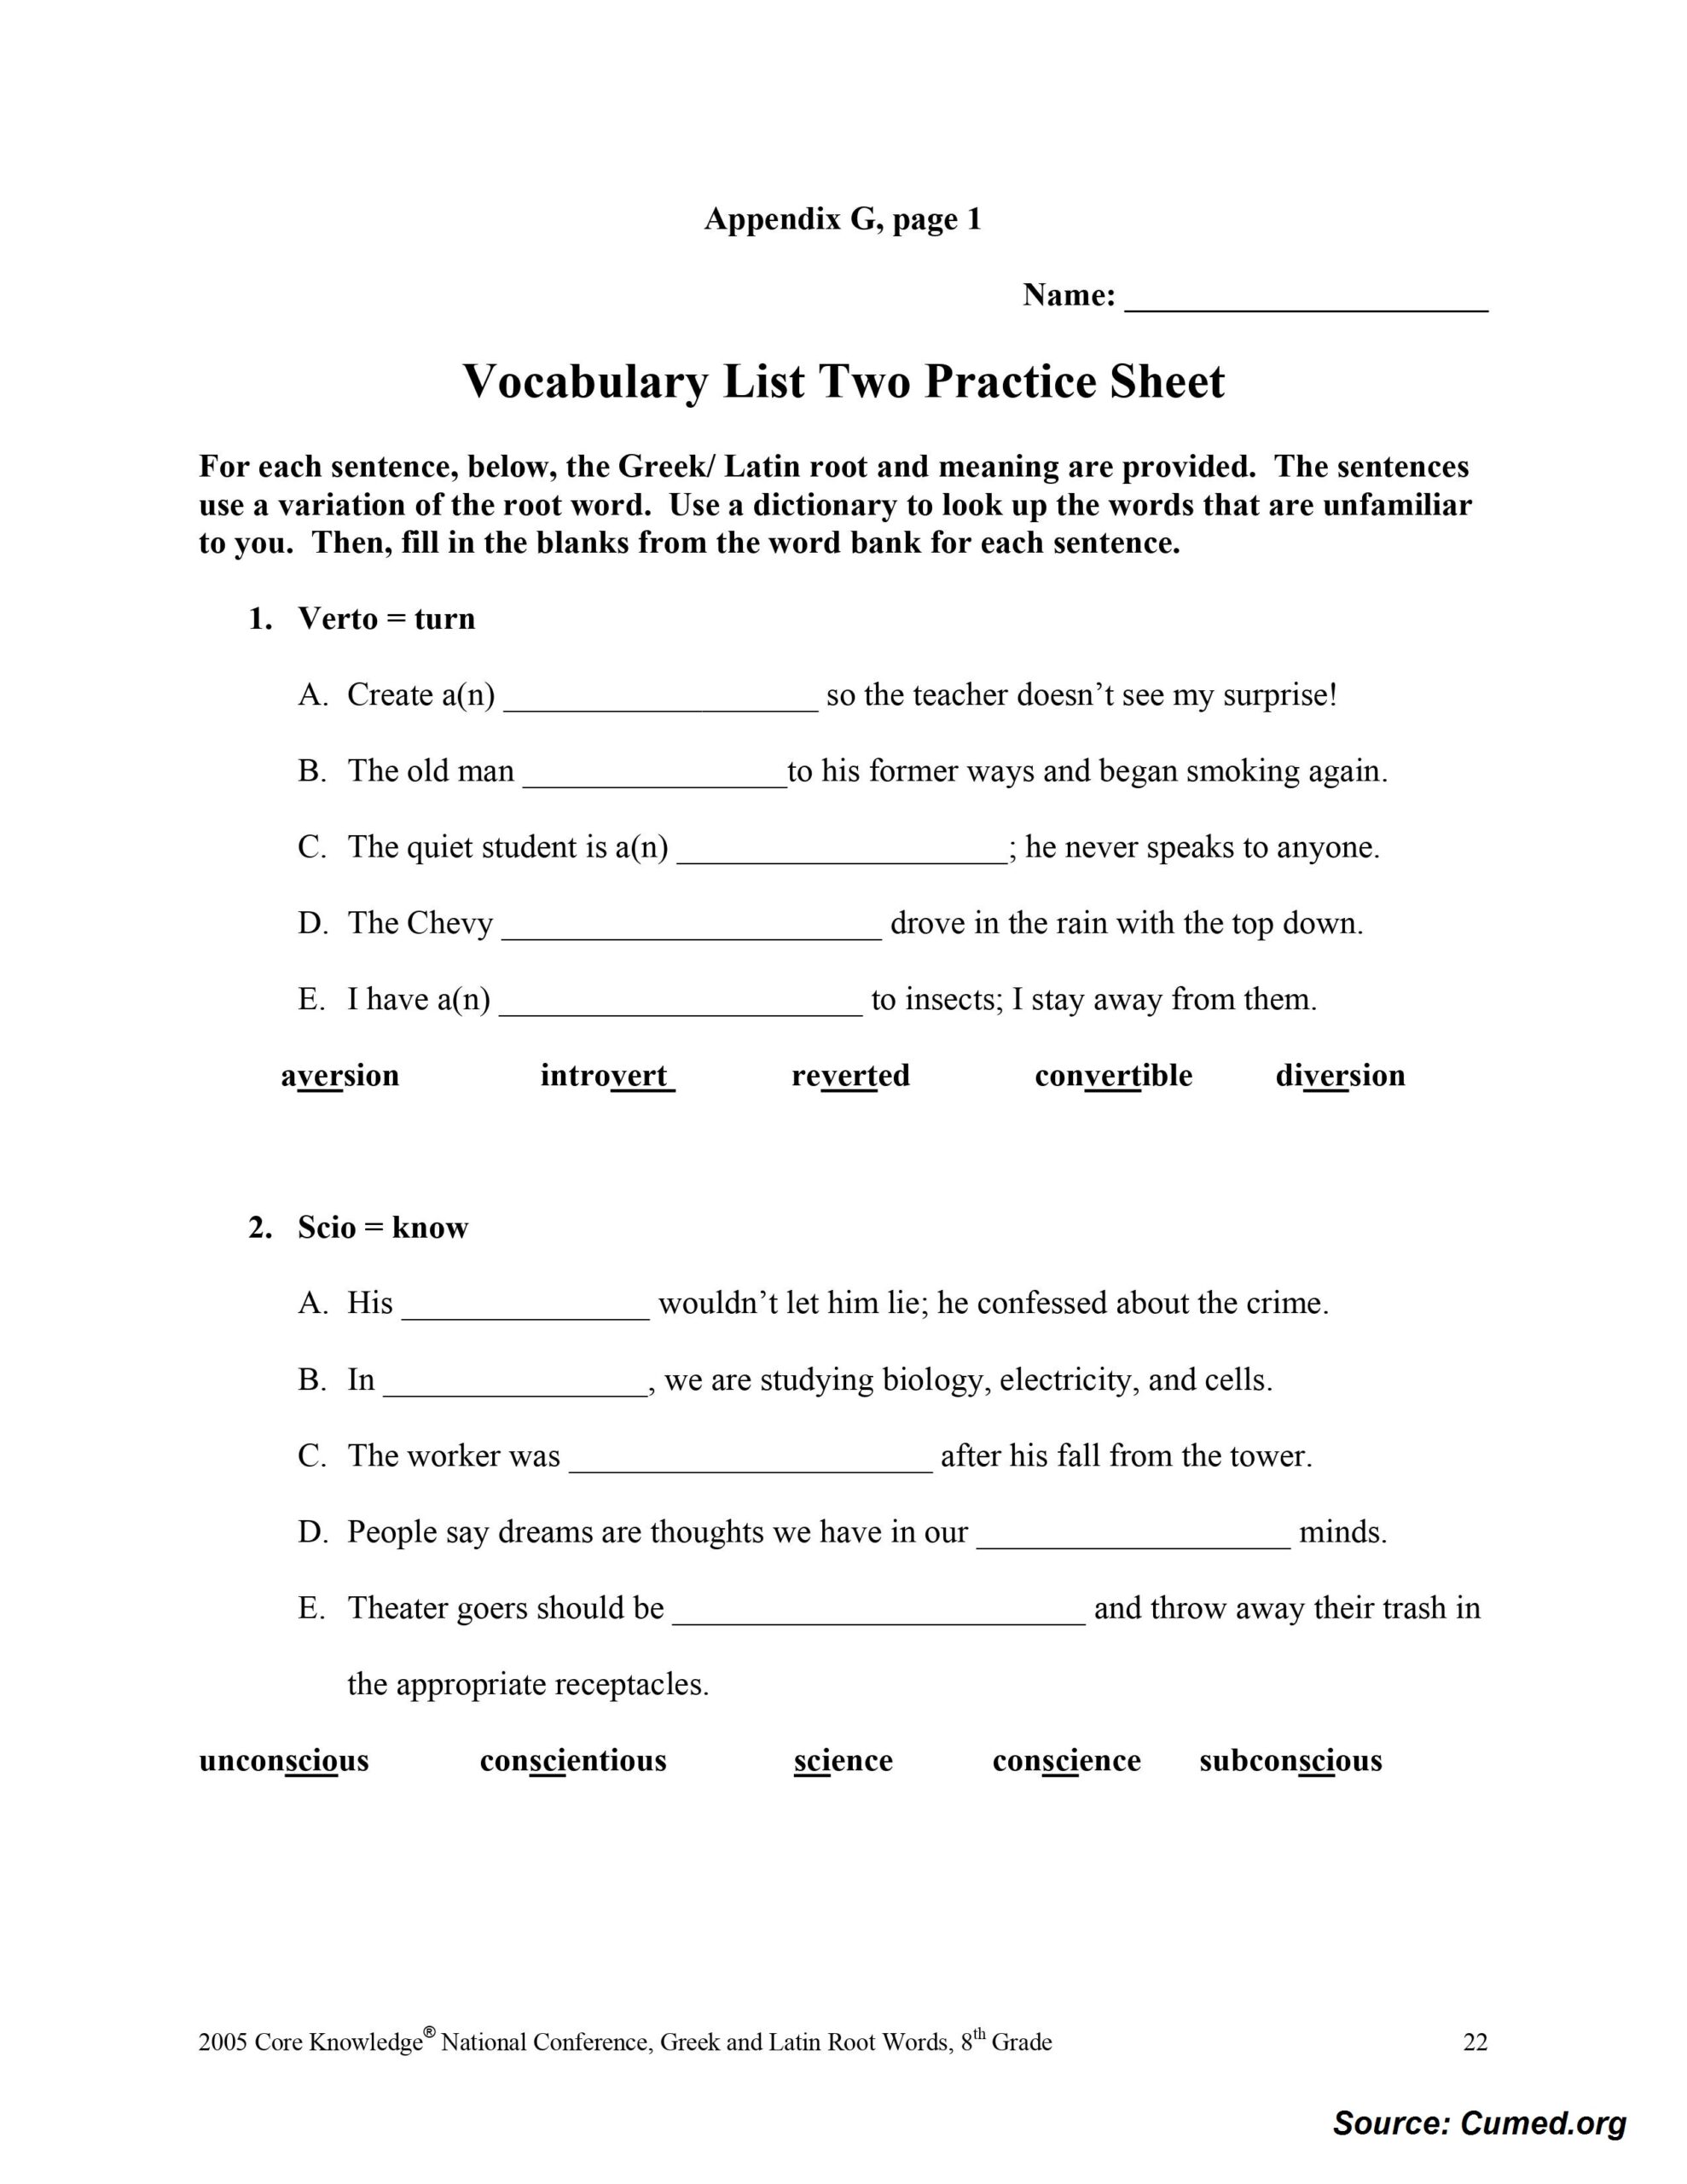 Greek And Latin Roots Worksheet